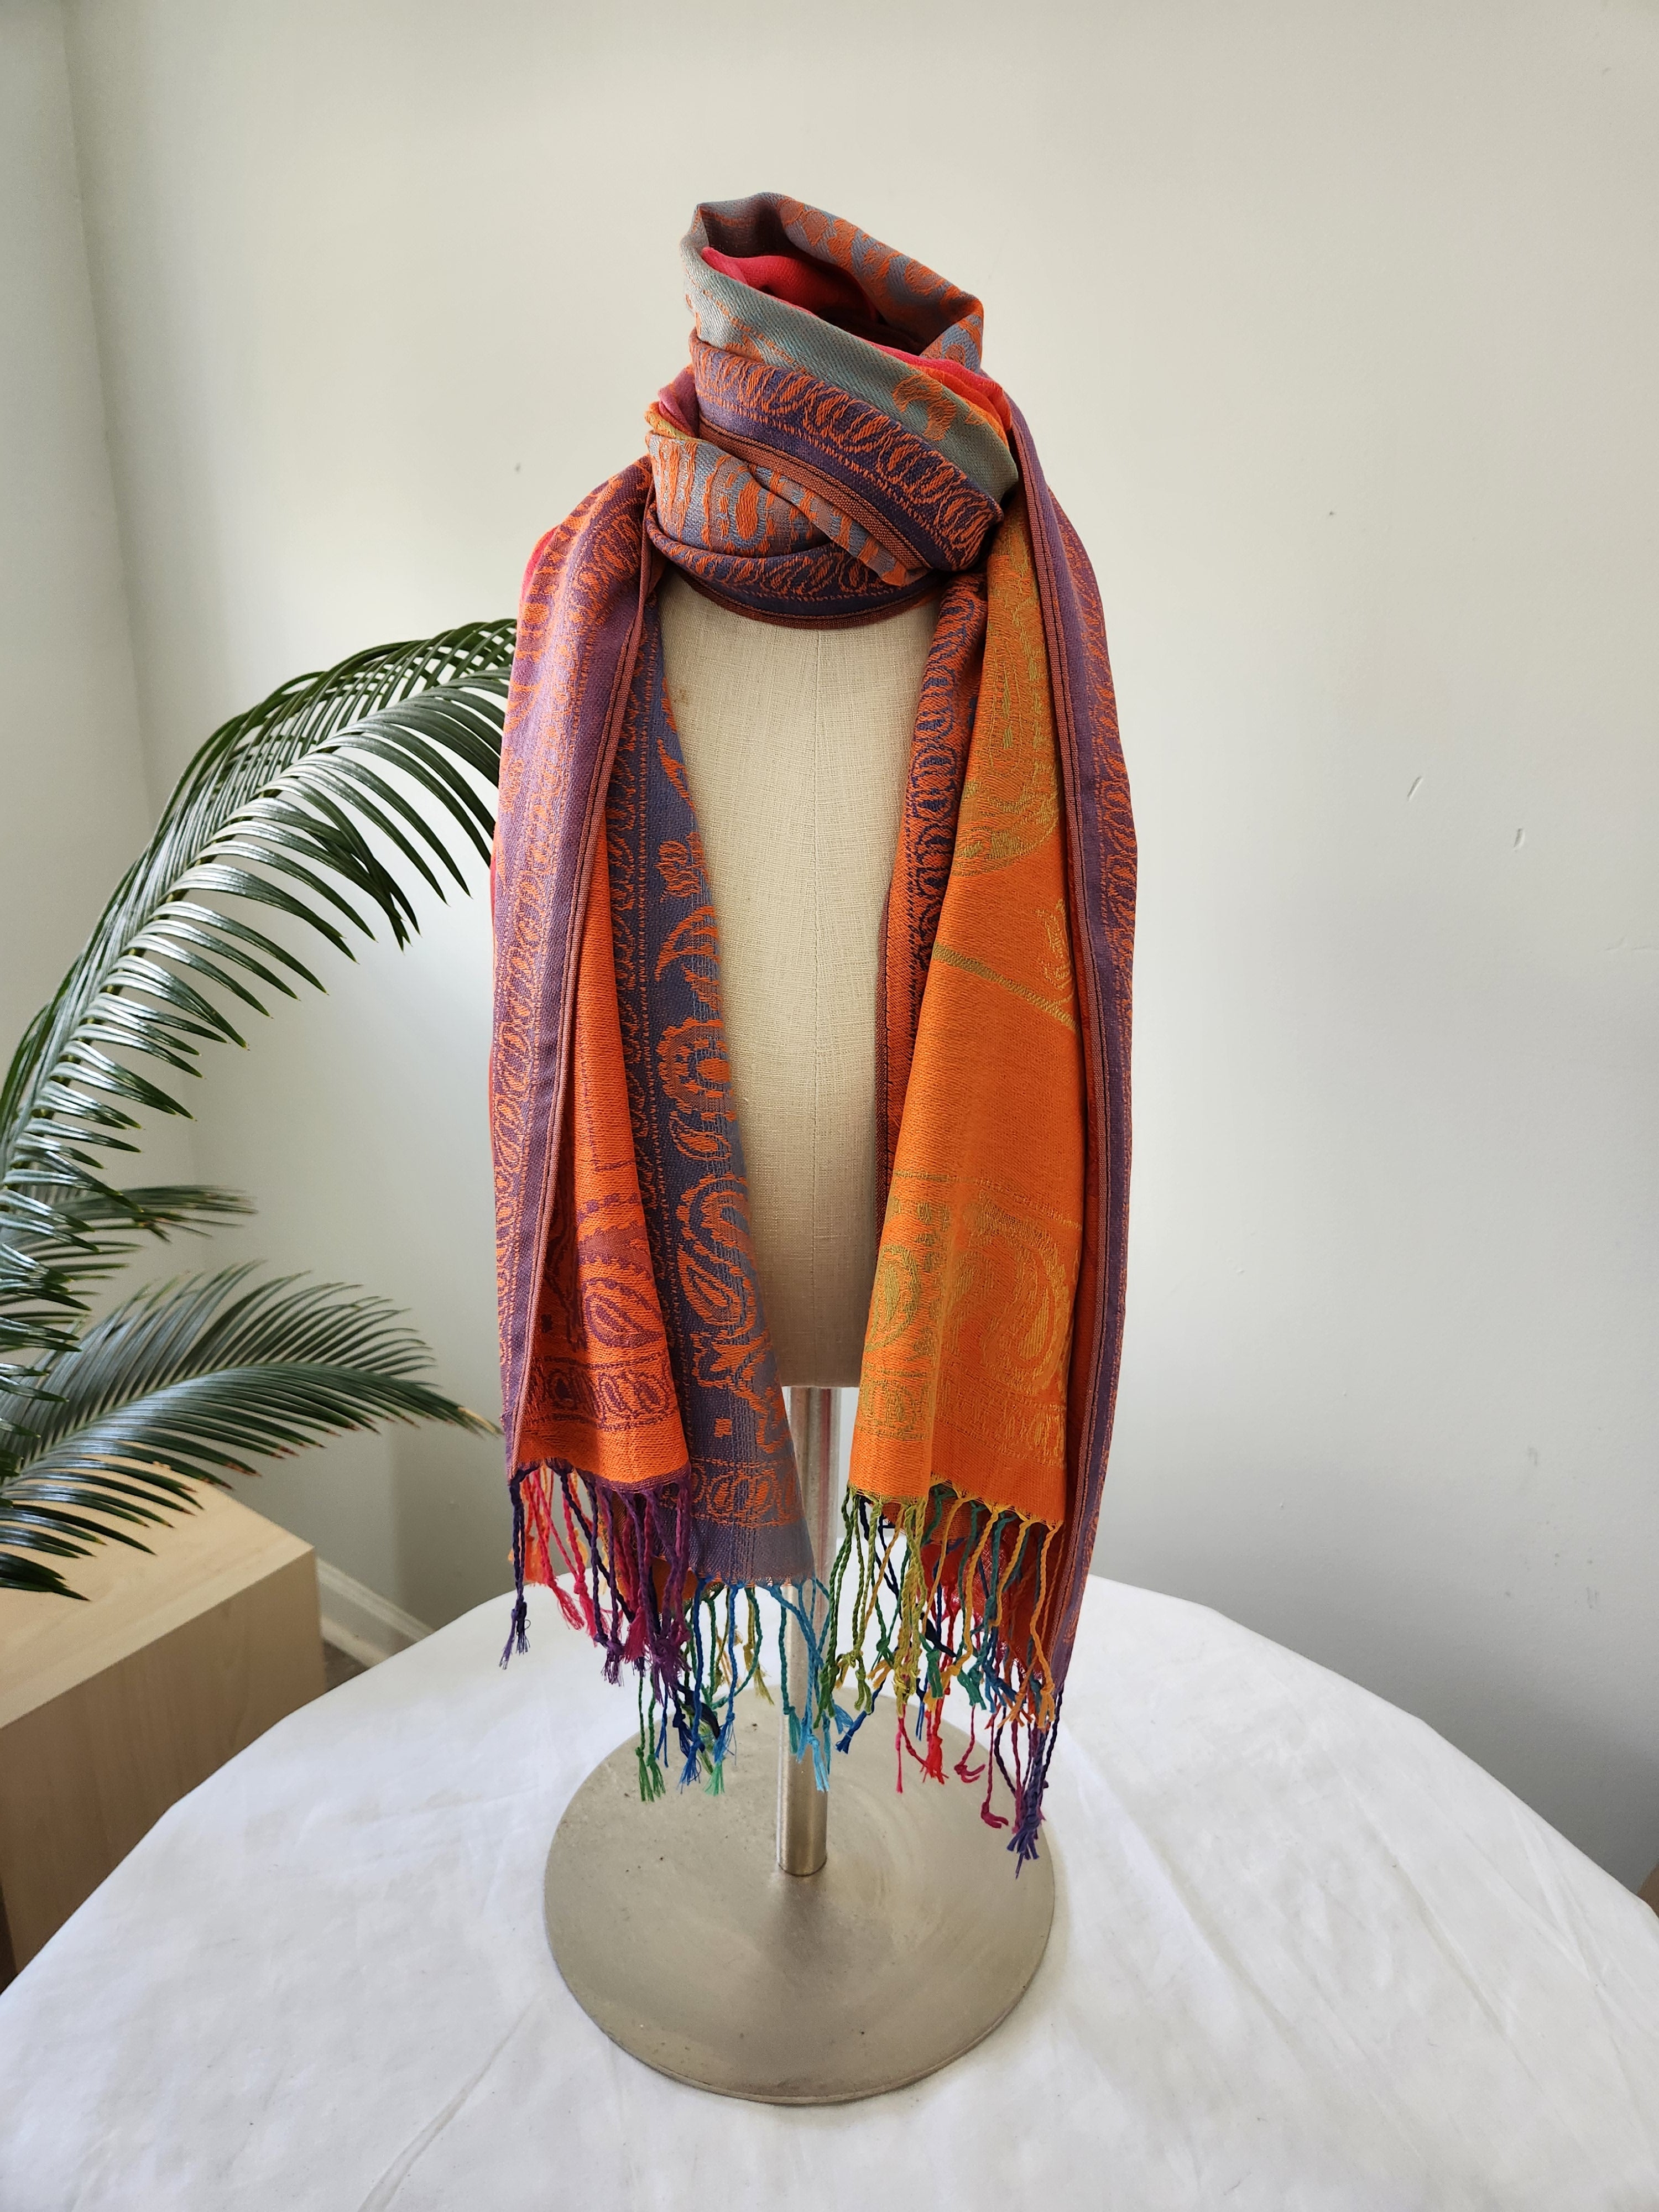 Buy mango Women&#39;s Elegant Scarf or Wrap, Colorful Jewel-Tones, Great Gift for Holidays